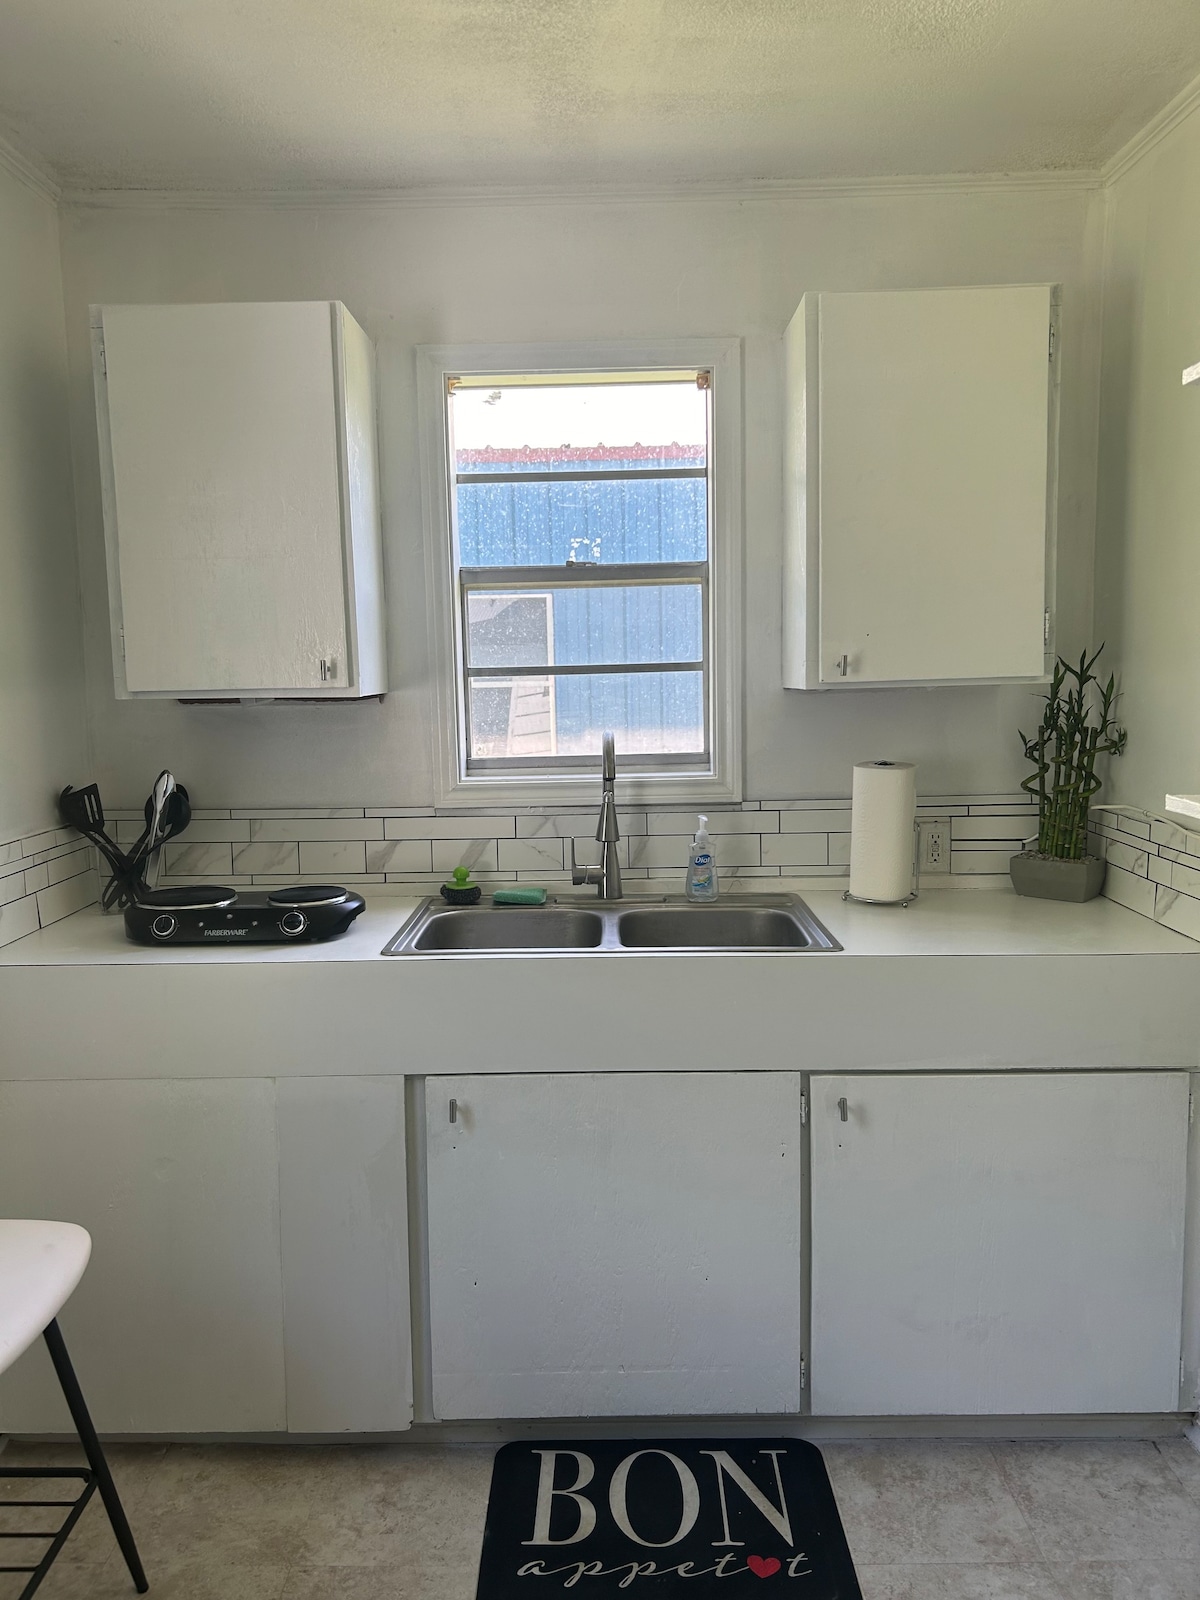 Private room | Great WiFi | Washer & Dryer